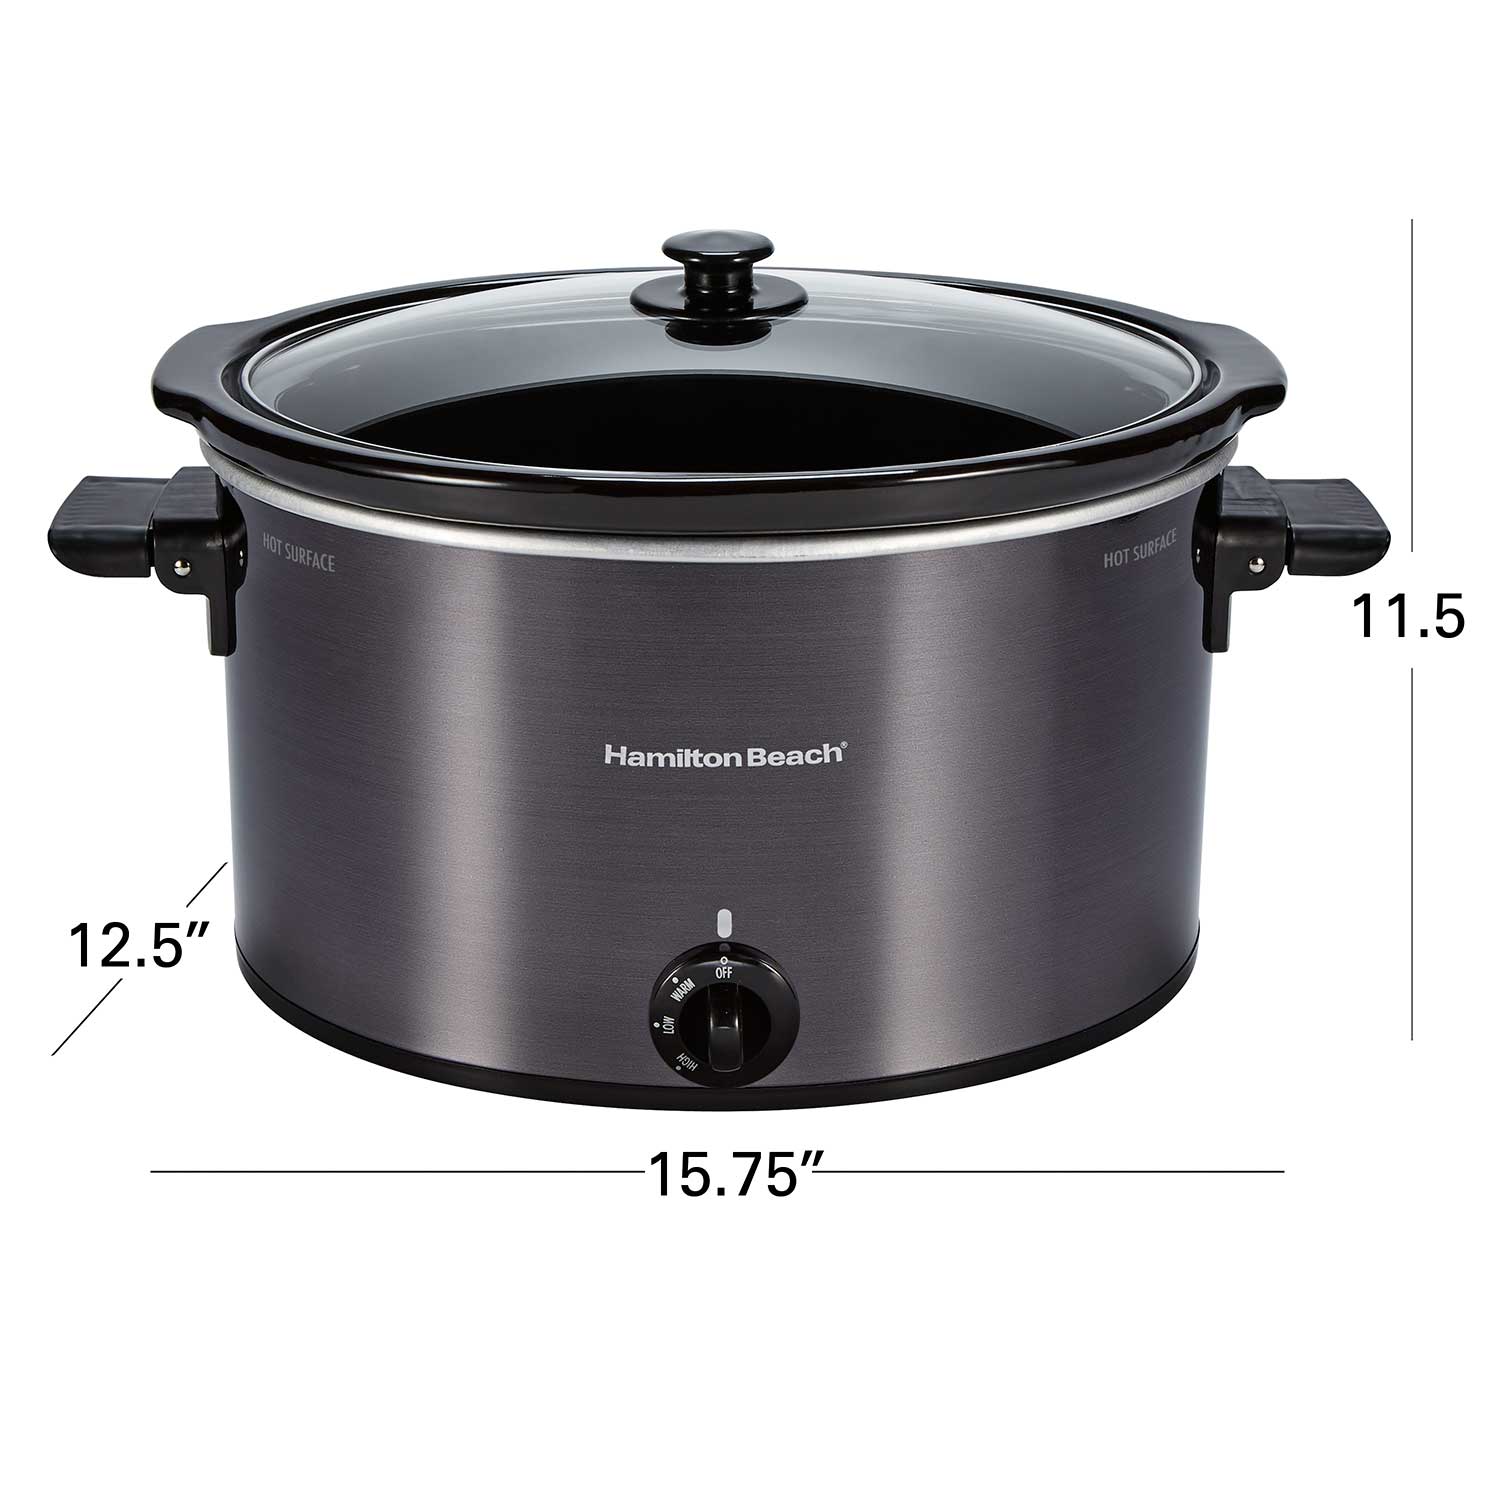 Hamilton Beach Stay or Go 10 Quart Oval Slow Cooker  Stay warm and full  all winter long with our Stay or Go 10 Quart Oval Slow Cooker, available at  Home Hardware